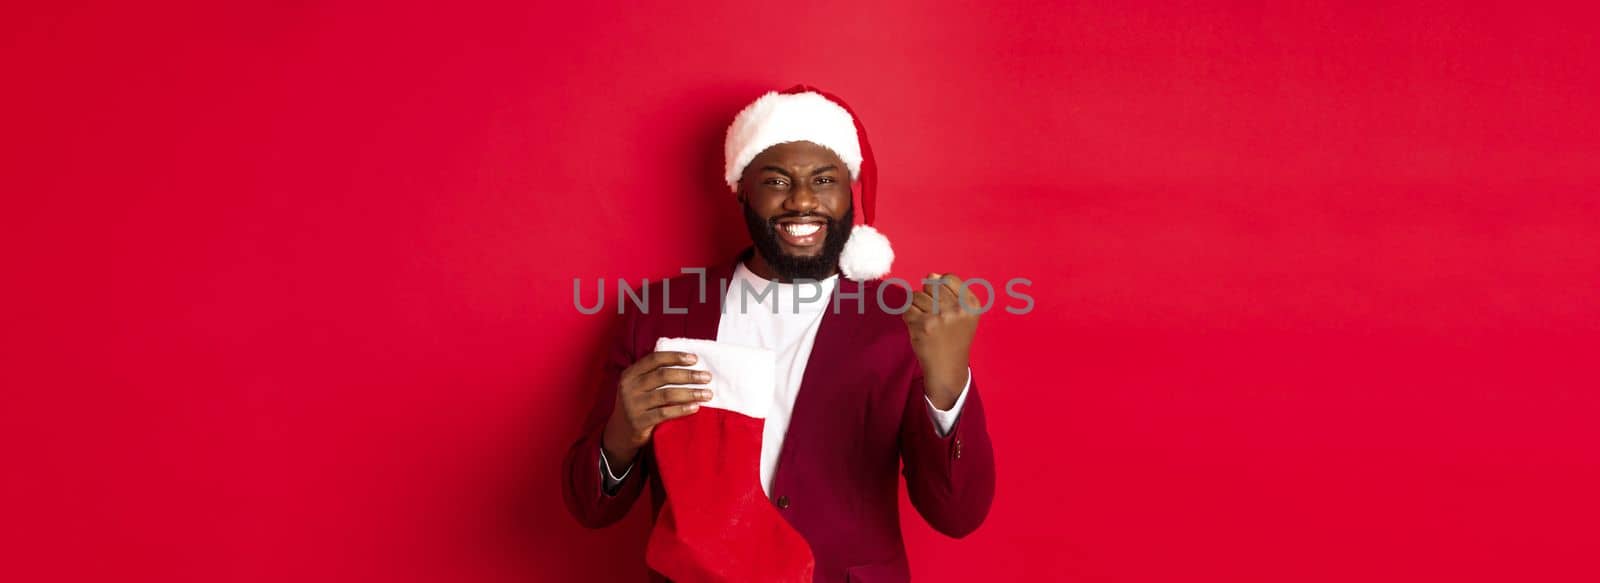 Happy man rejoicing, receive presents in Christmas sock, making fist pump and smiling satisfied, standing over red background.